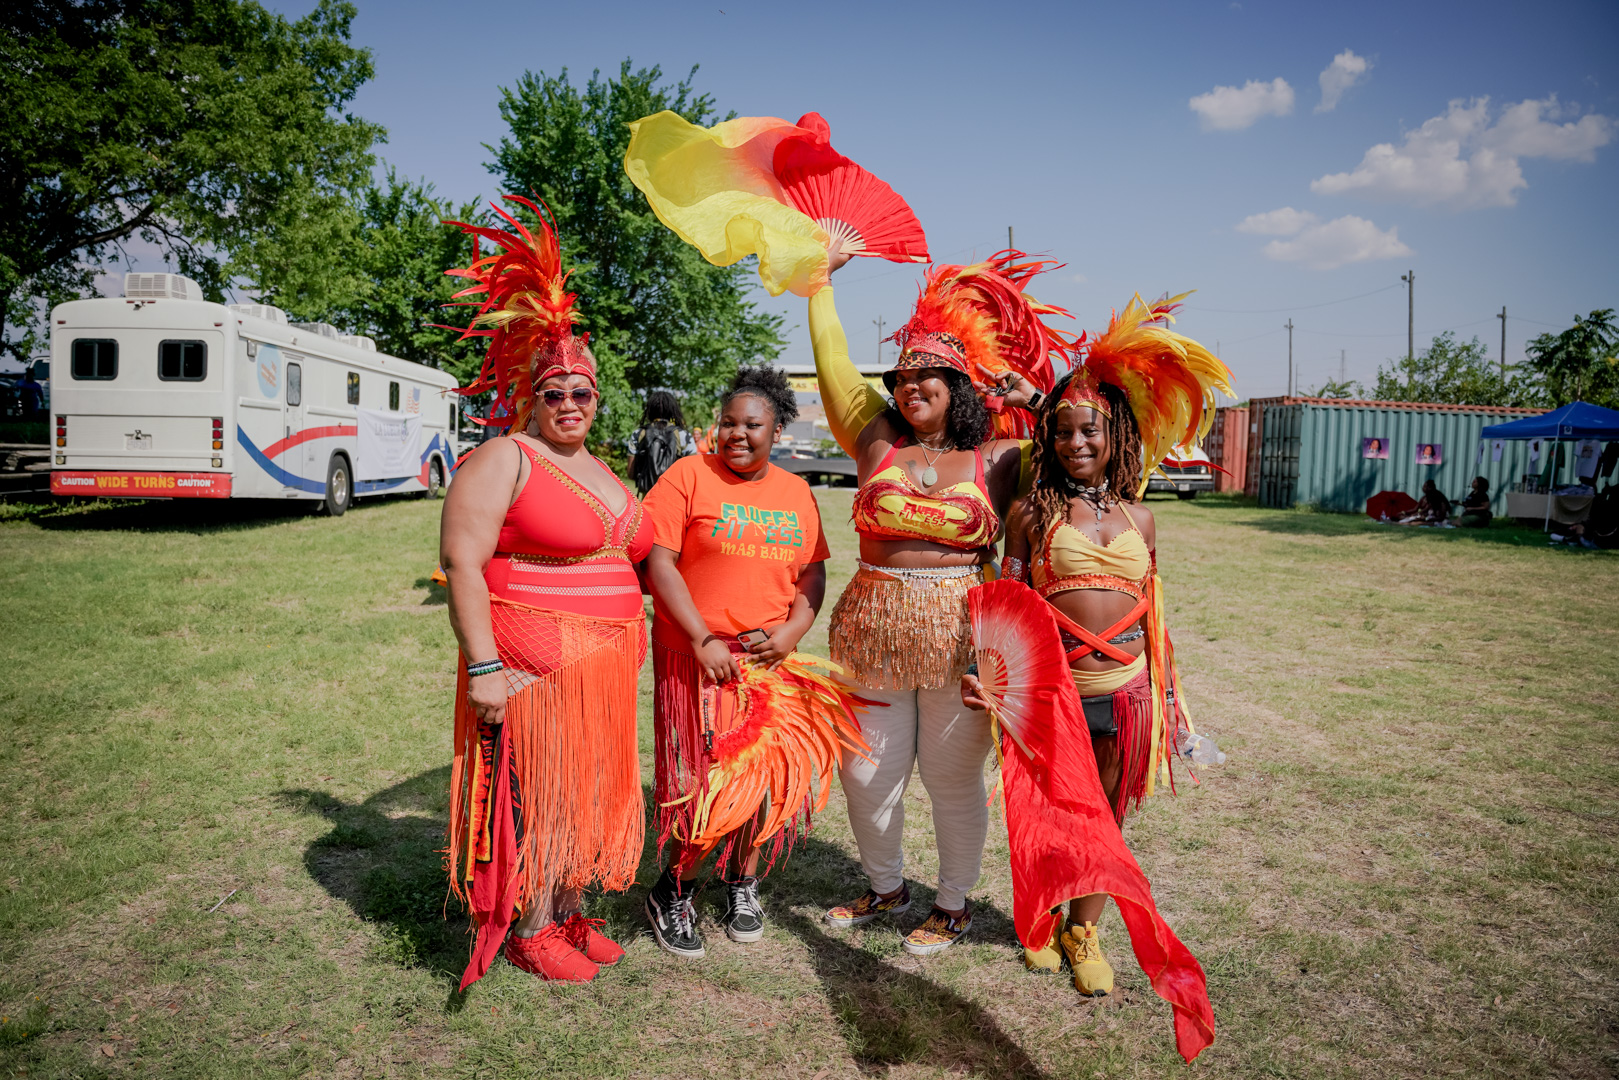 Four women in red, orange and yellow dance outfits